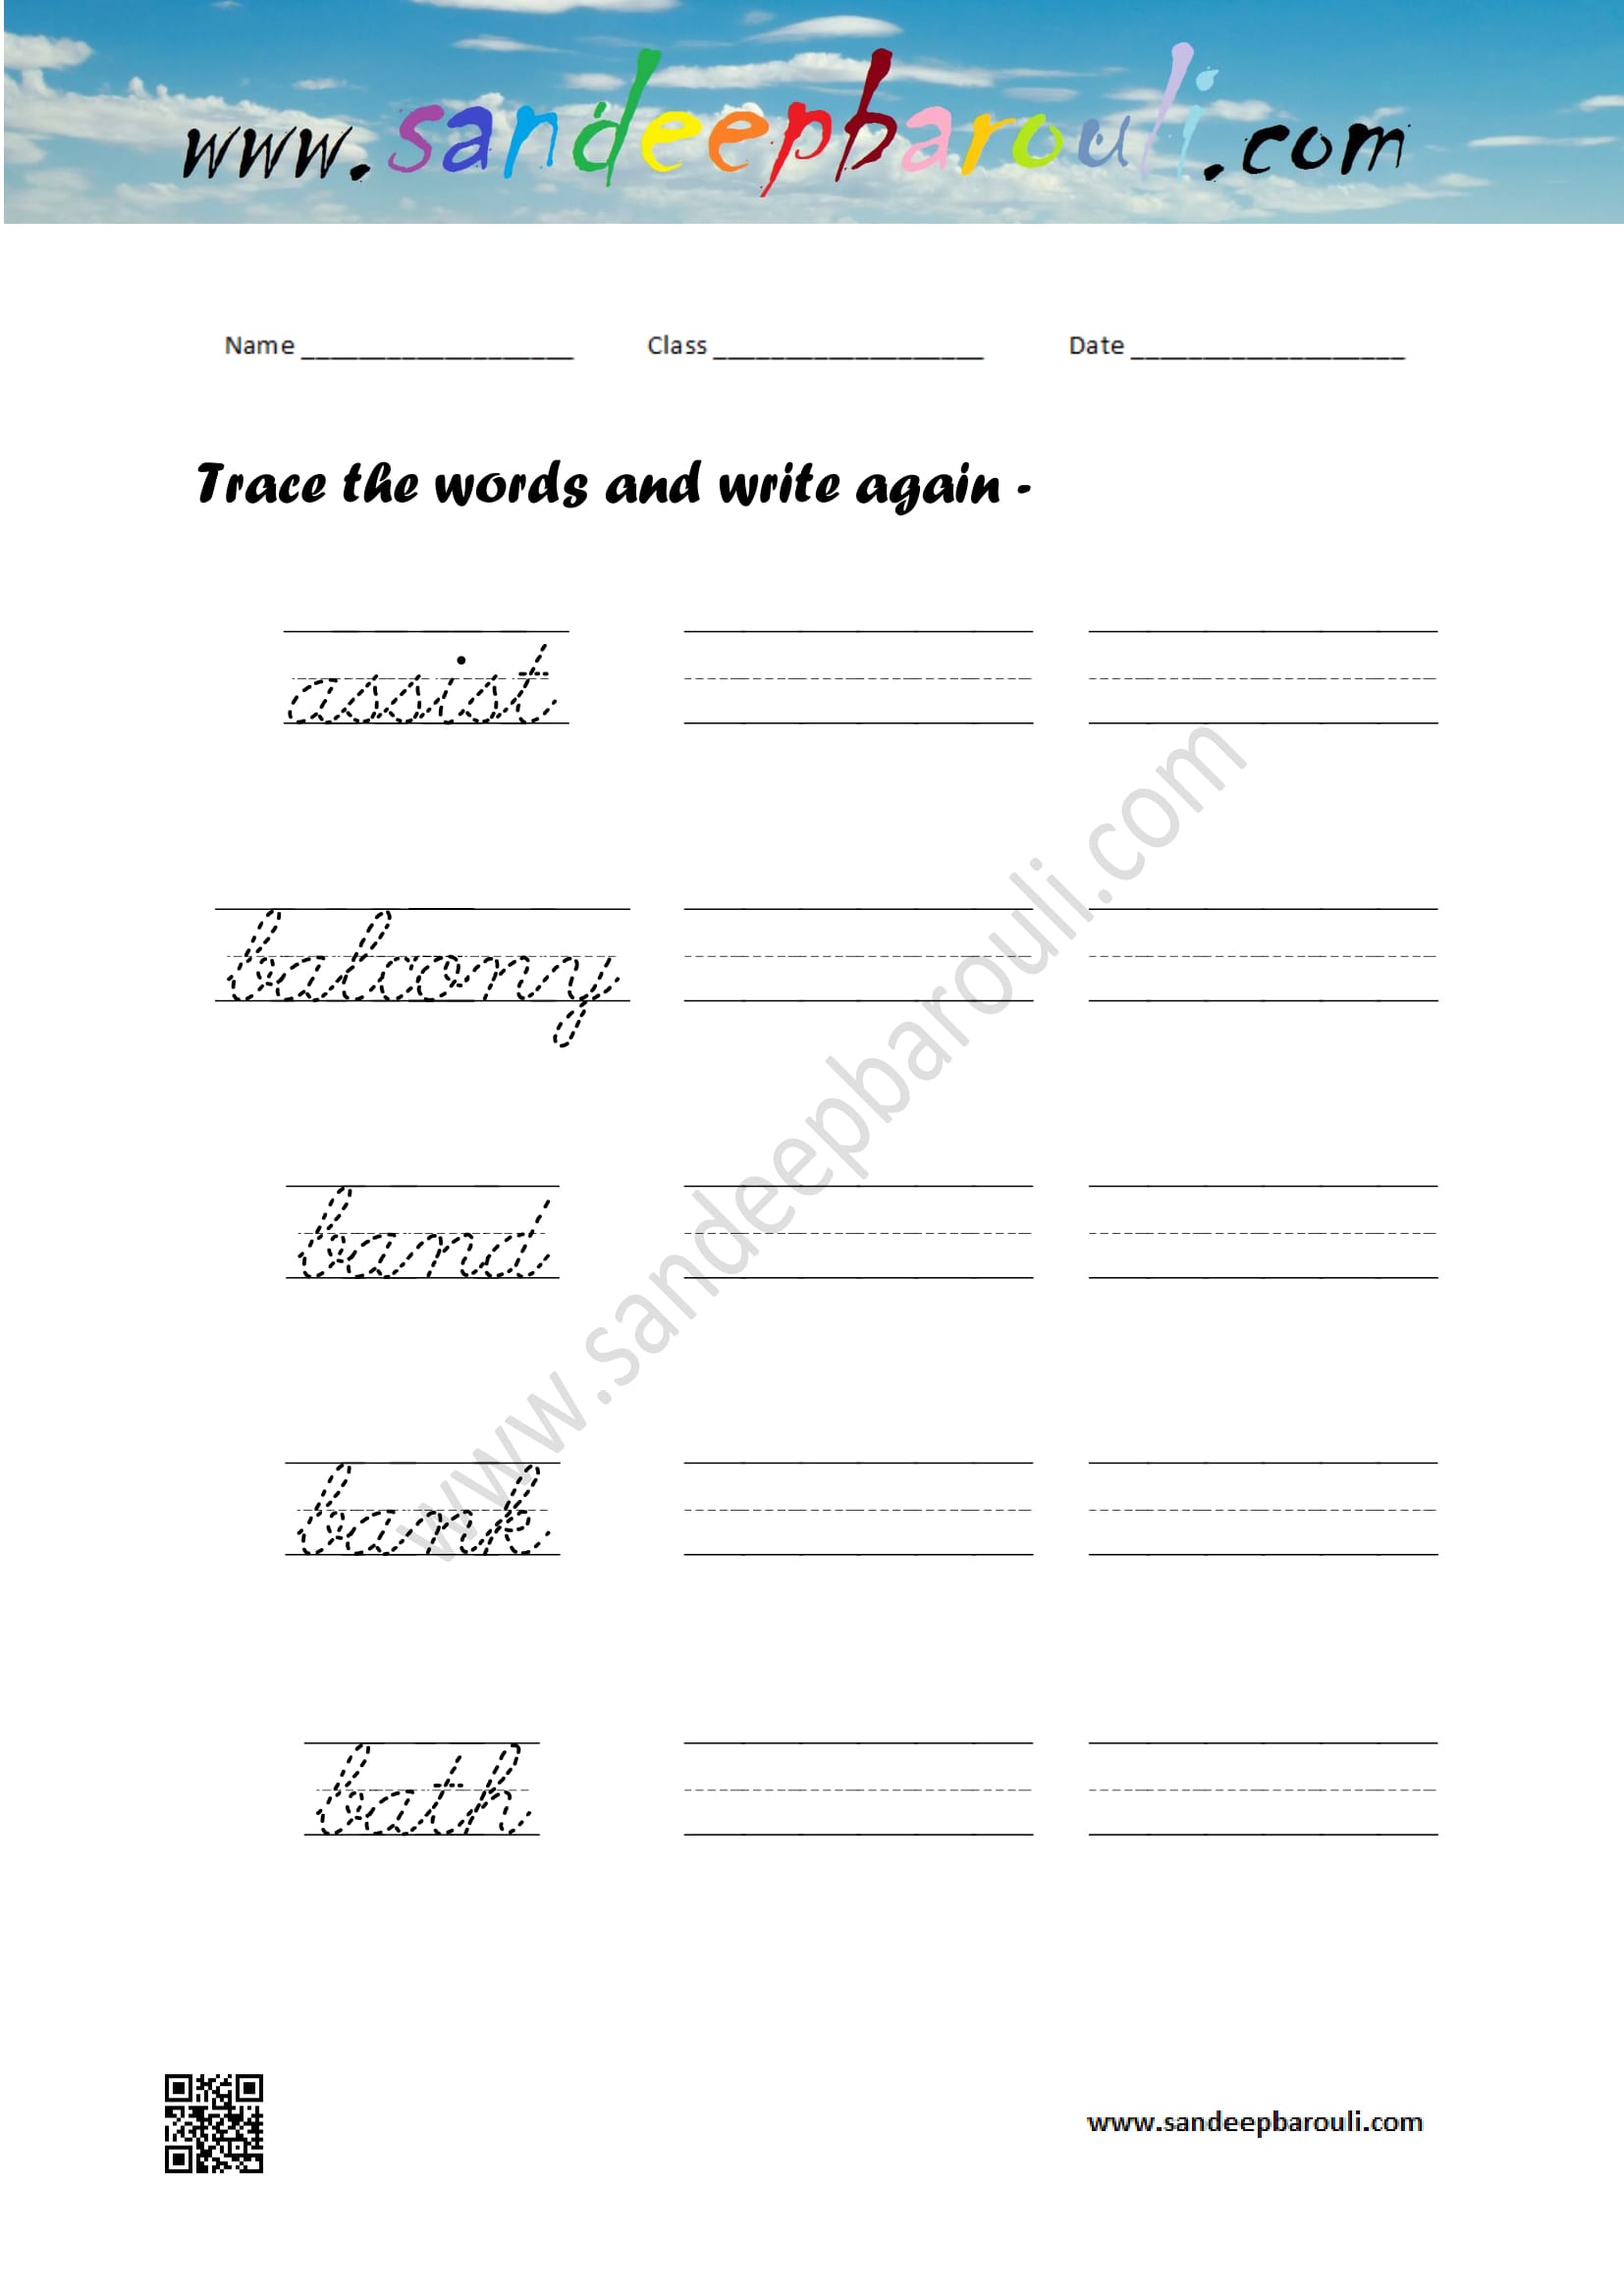 Cursive writing worksheet – trace the words and write again (116)